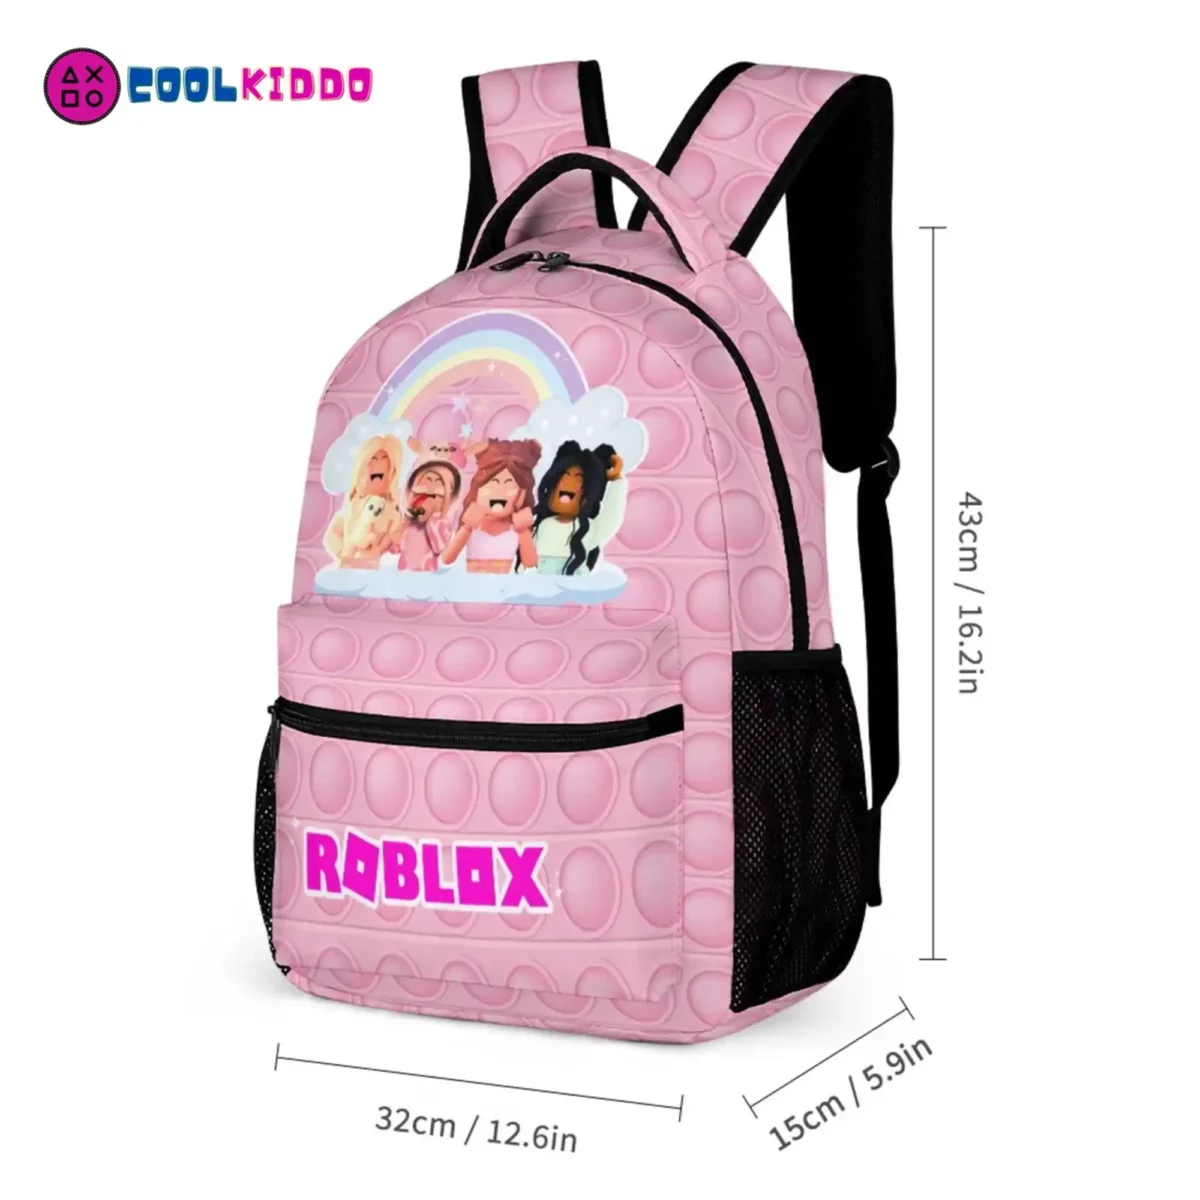 Personalized Roblox Pink Backpack for Girls – Three-Piece Set: Backpack, Lunch Bag, and Pencil Case Cool Kiddo 18